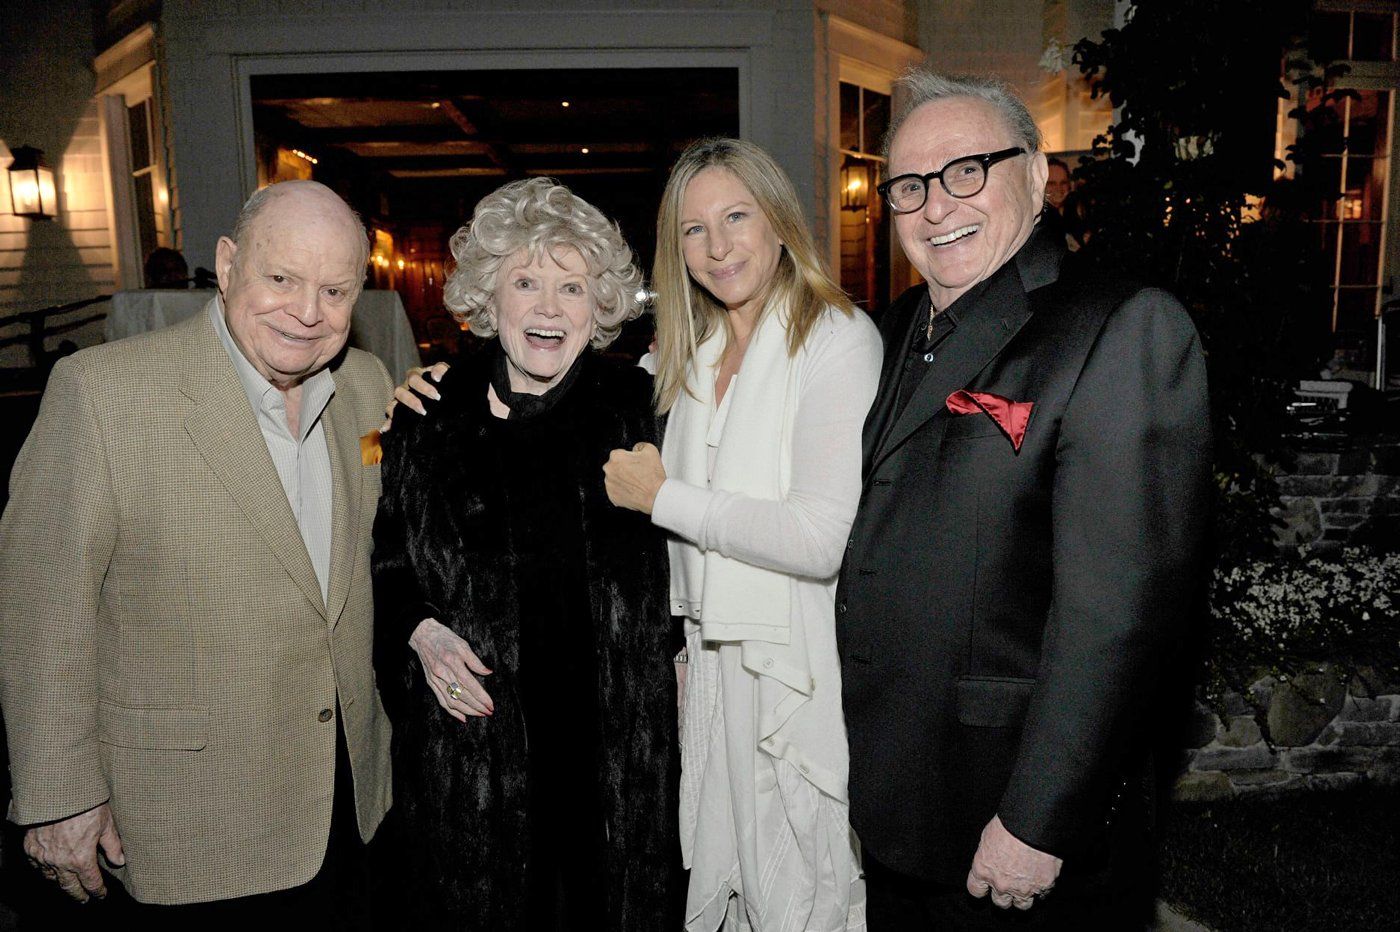 Don Rickles, Phyllis Diller, Barbra Streisand and Marty Erlichman at his birthday party.